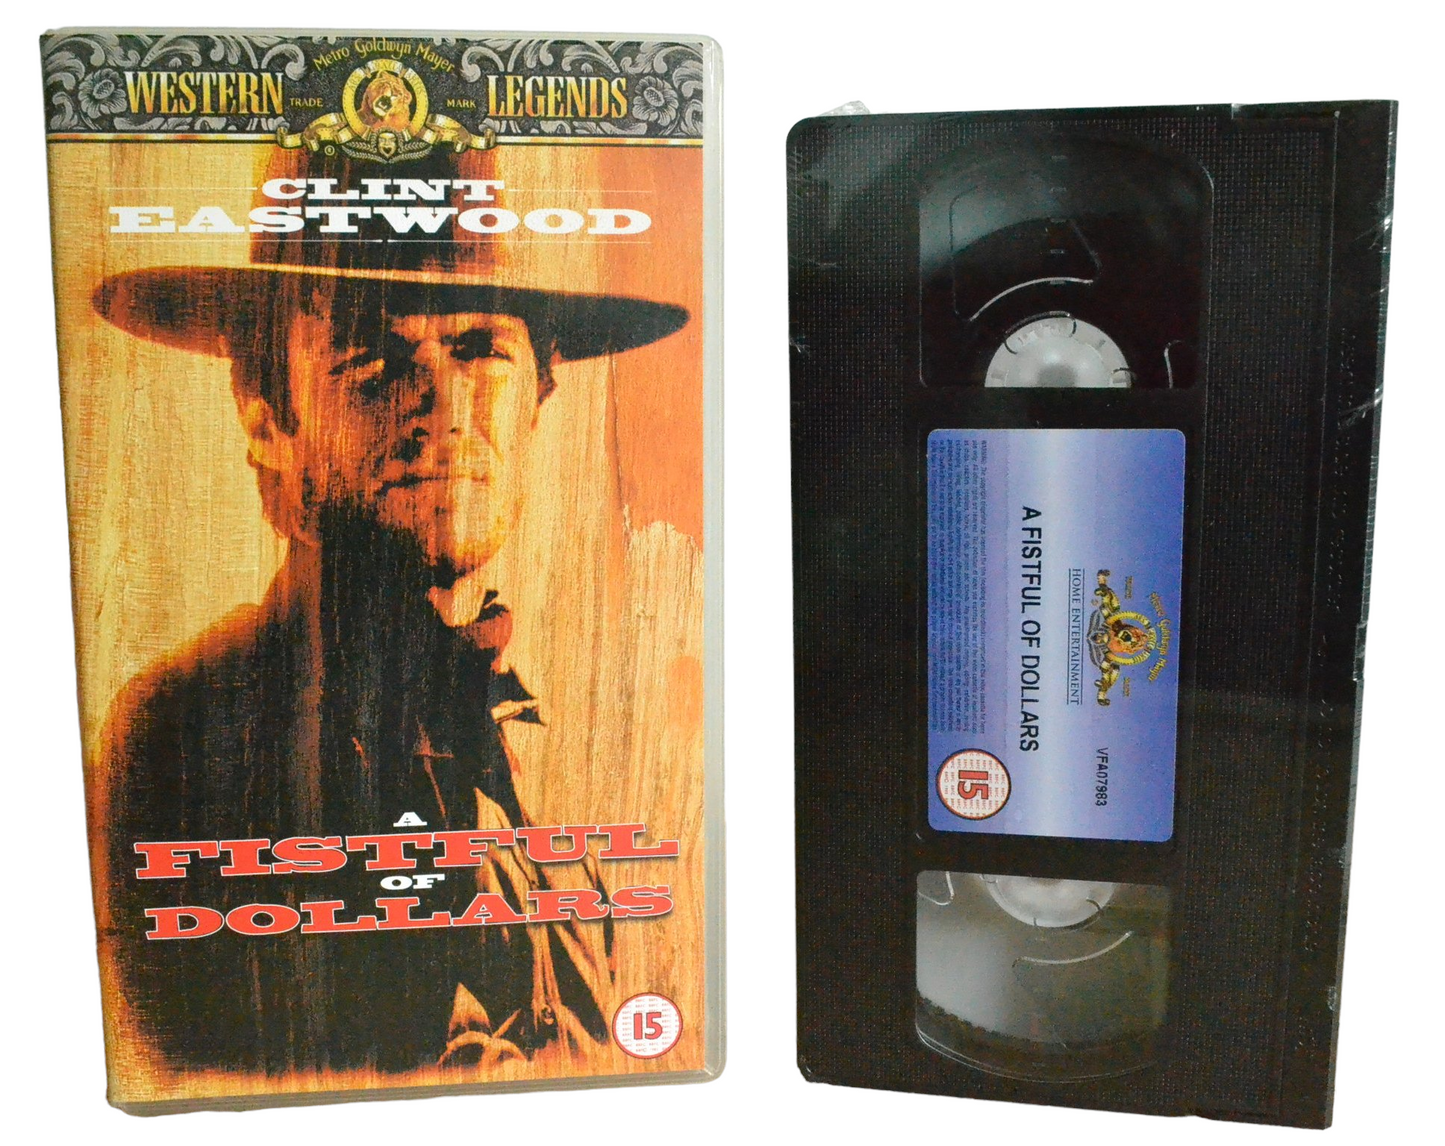 Clint Eastwood A Fistful of Dollars - Clint Eastwood - Home Entertainment - 1616 9S - Brand New Sealed - Pal - VHS-